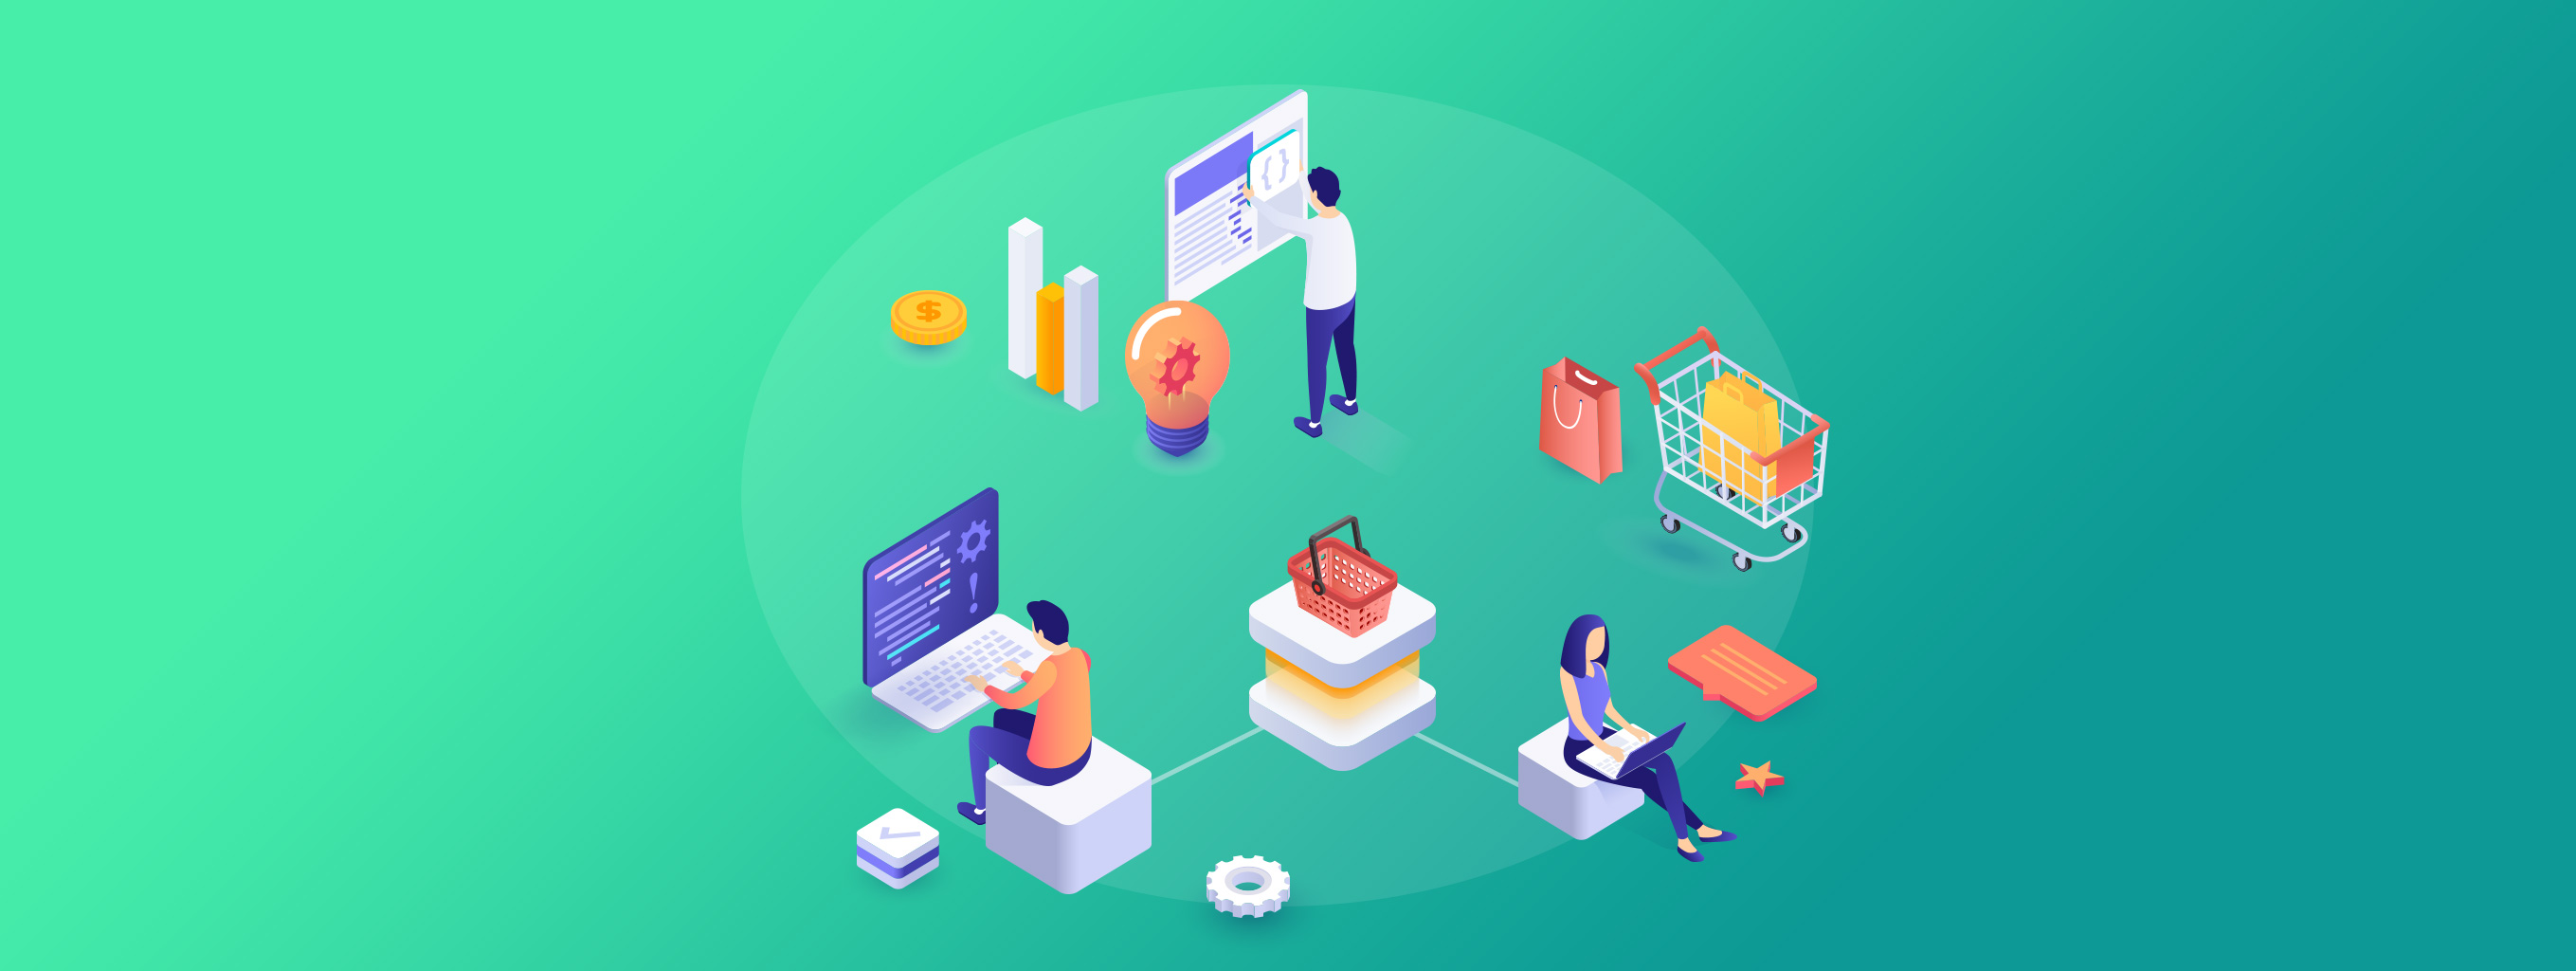 Five takeaways from RetailWire’s 2021 Planning & Analytics study